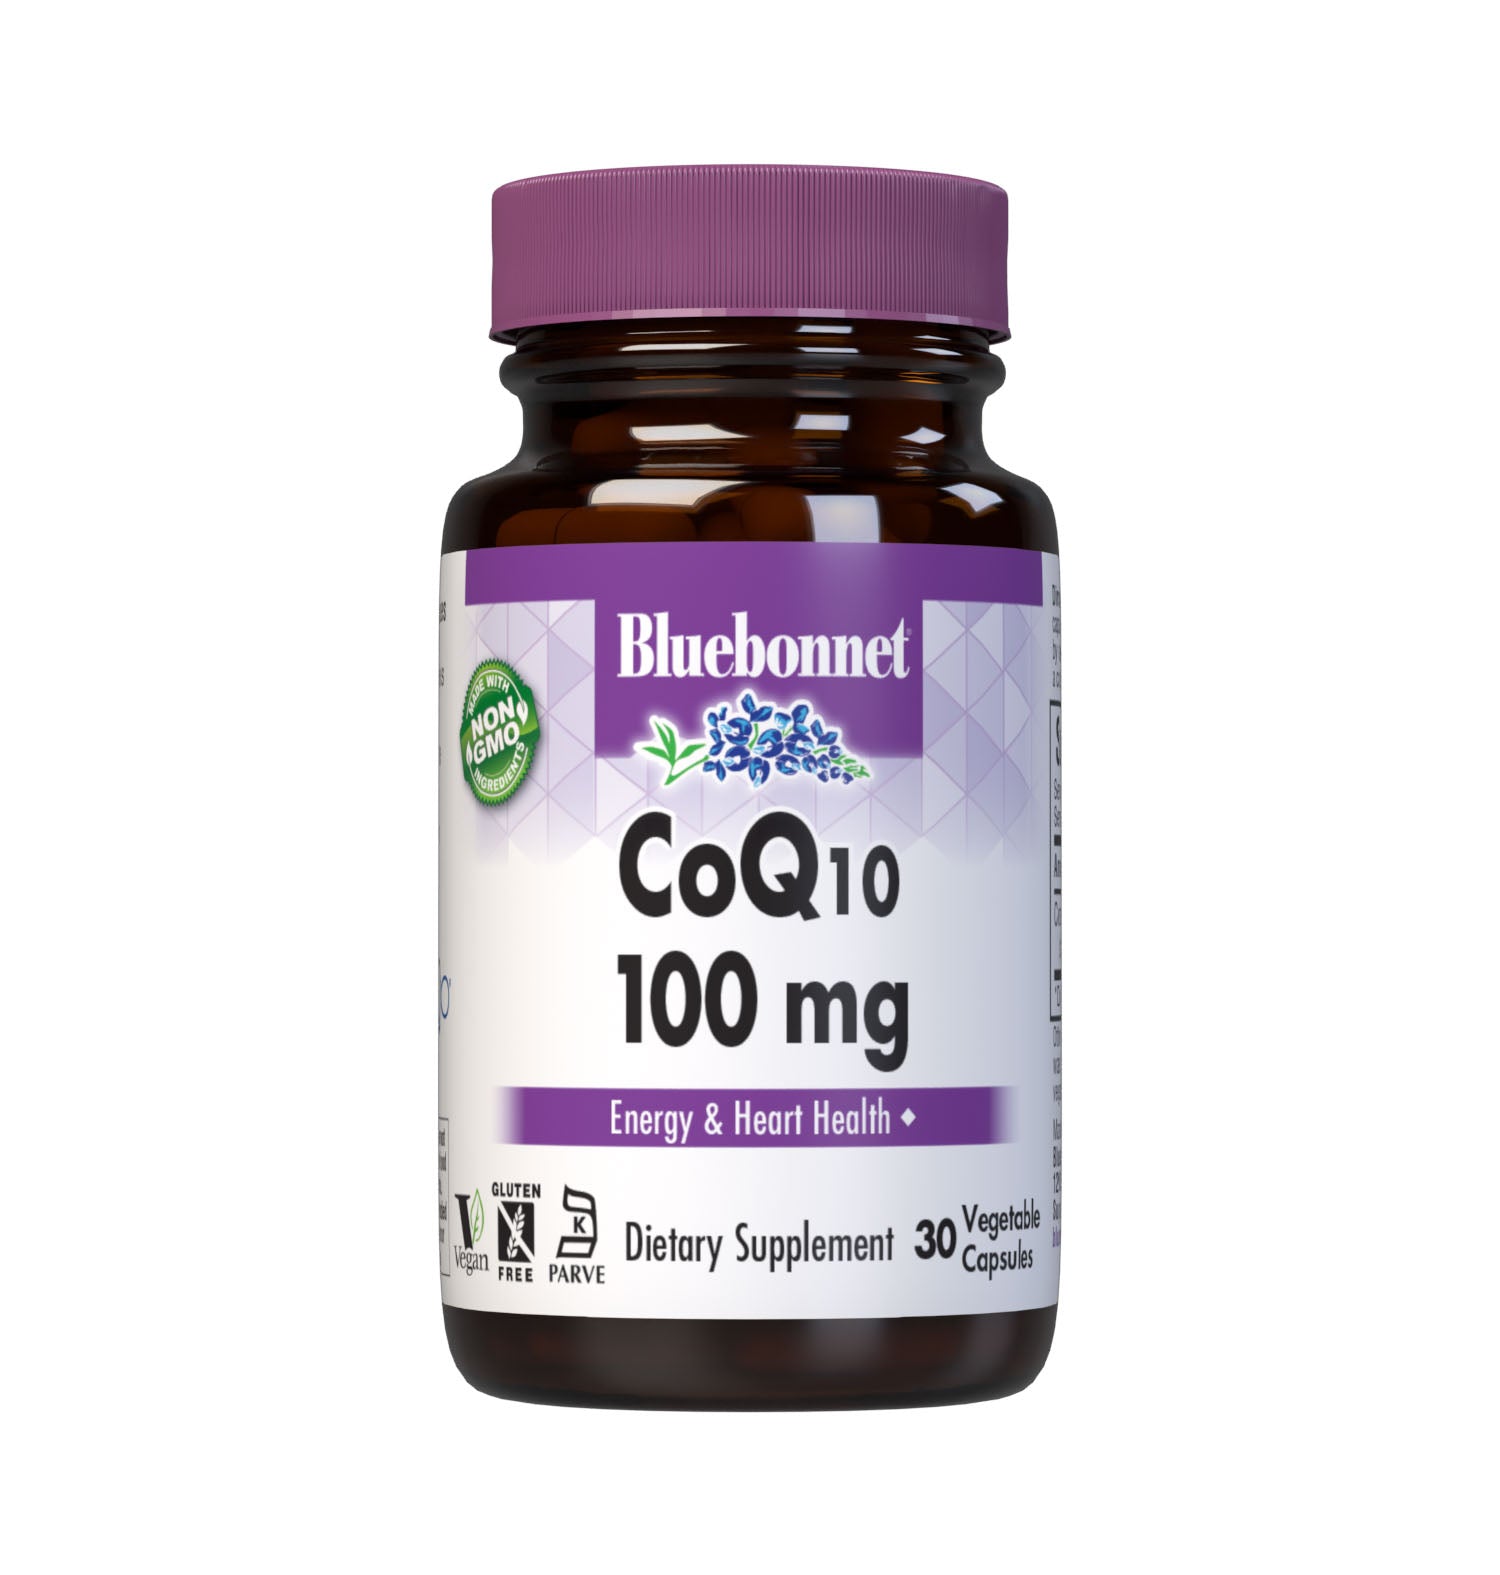 Bluebonnet’s CoQ10 100 mg 30 Vegetable Capsules provide 100% “trans-isomer” coenzyme Q10. Available in easy-to-swallow vegetable capsules for maximum assimilation and absorption. #size_30 count